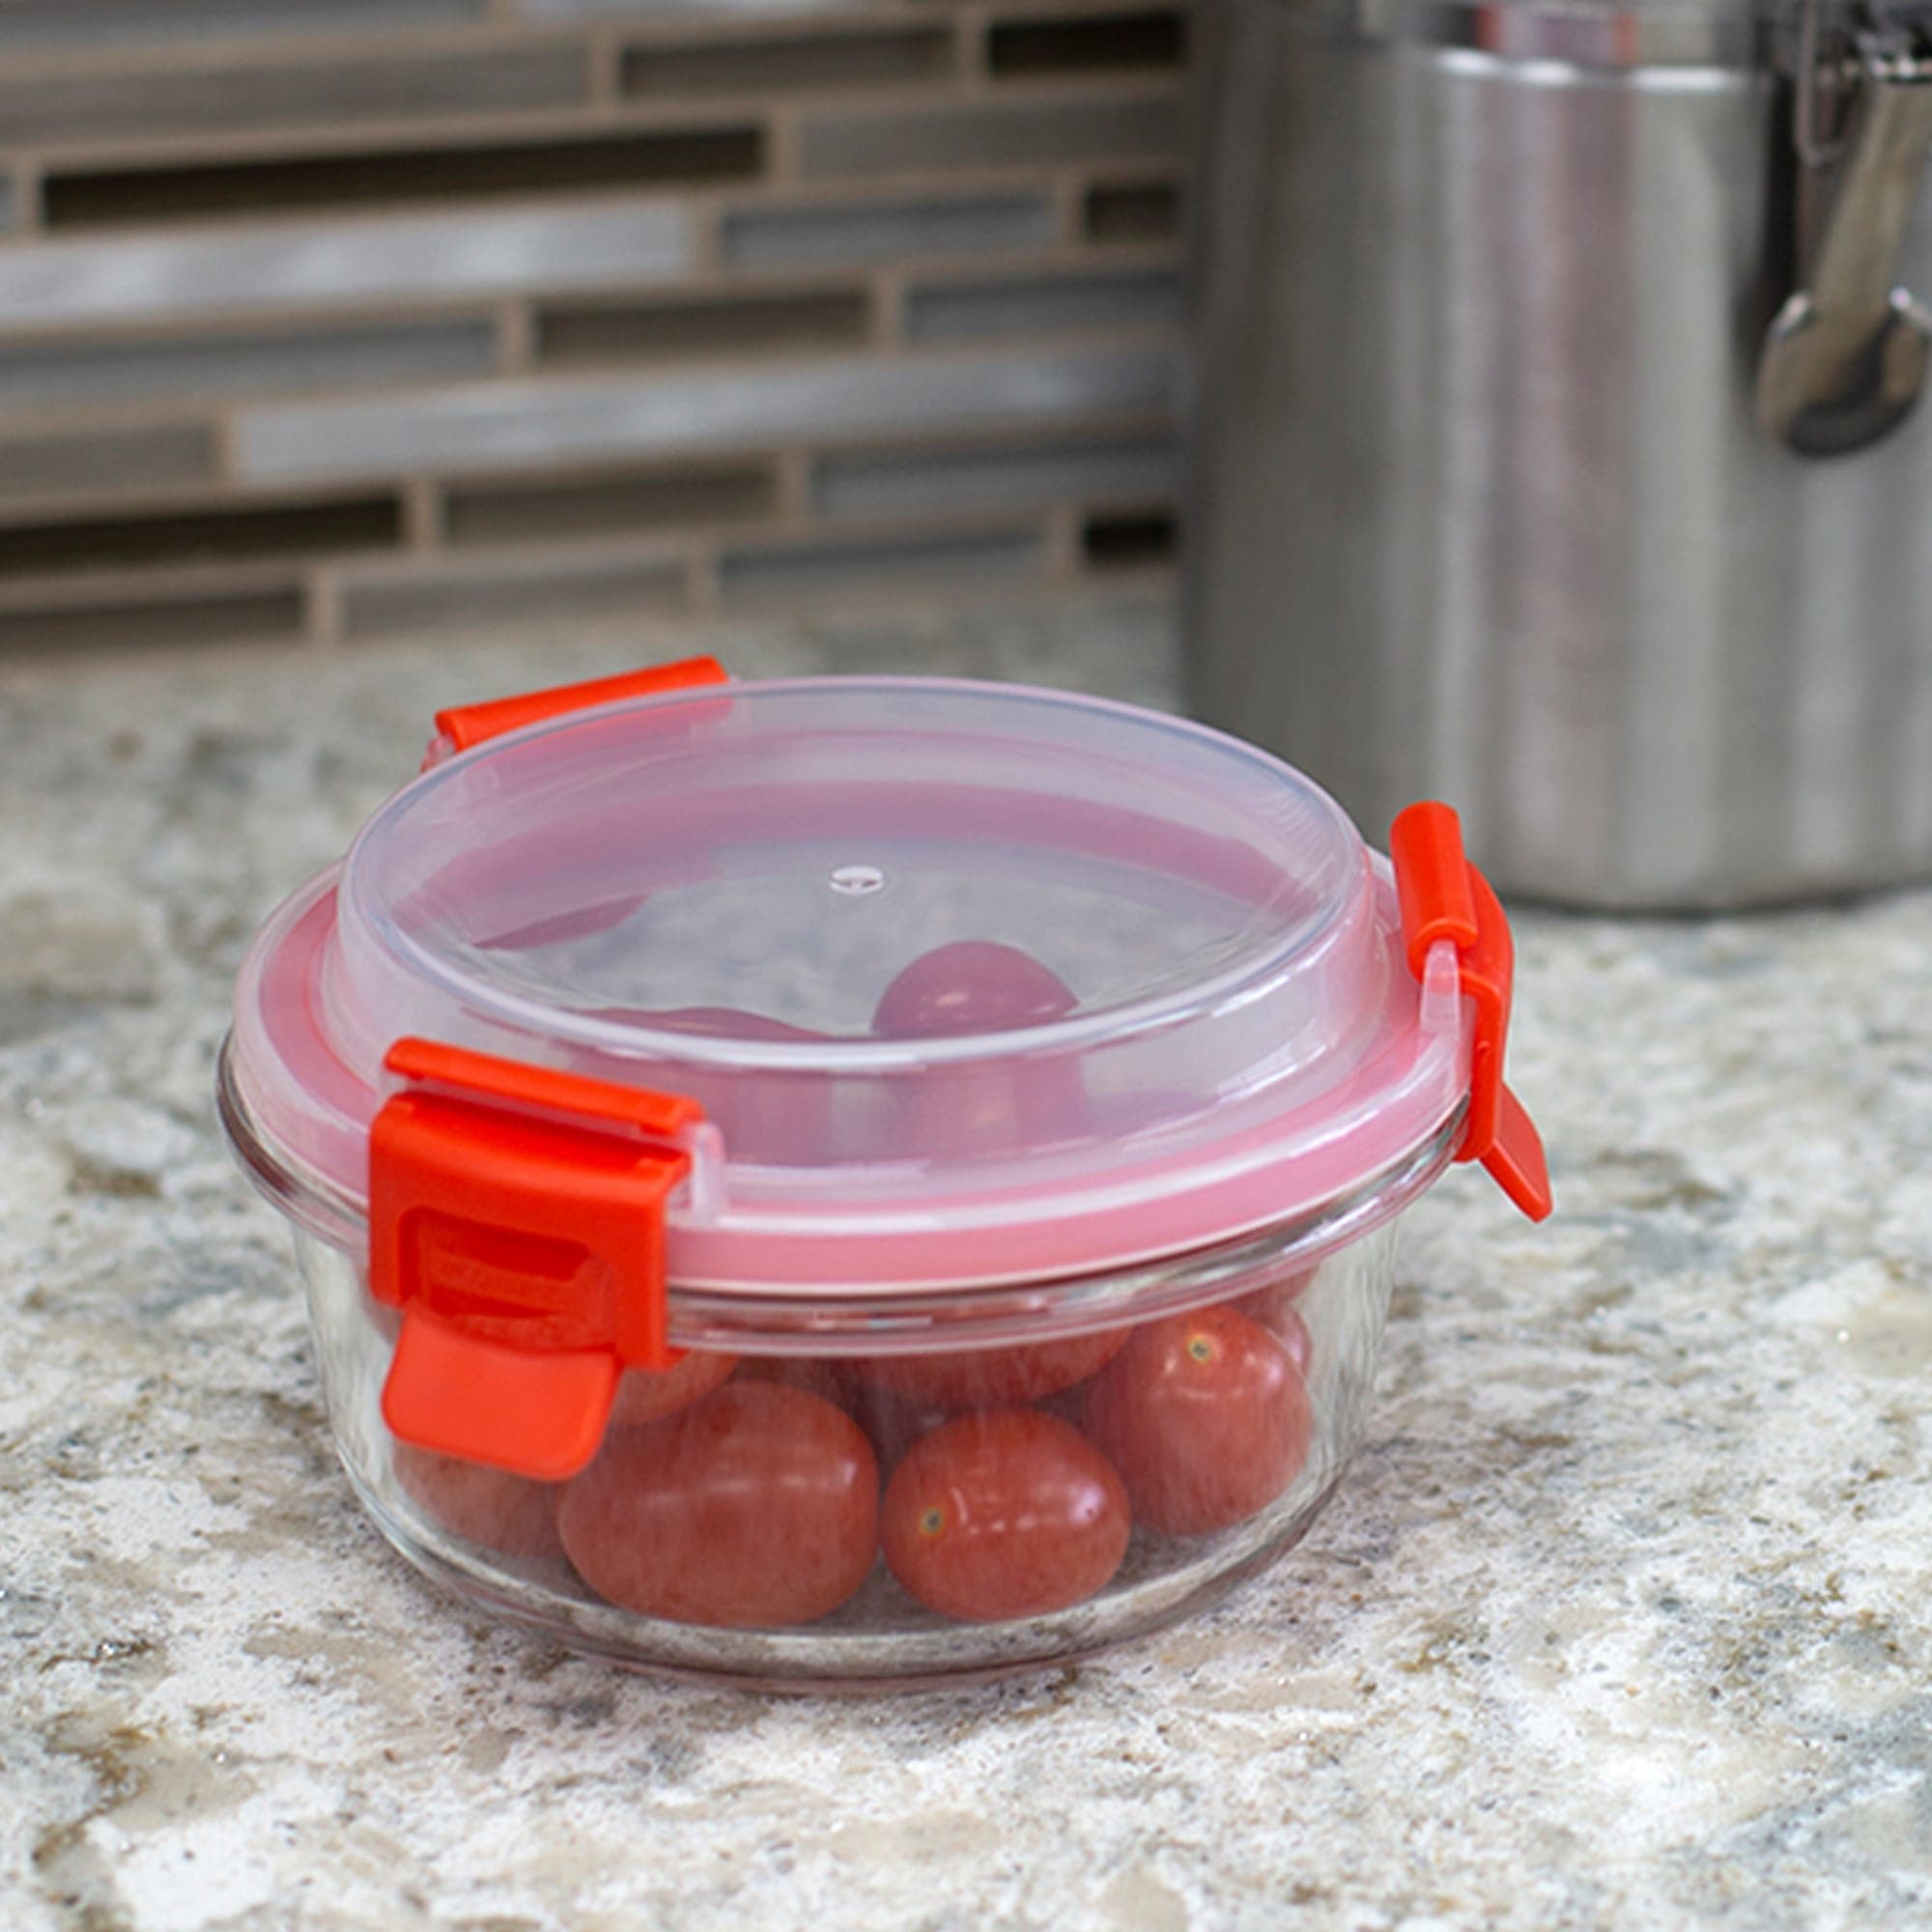 Home Basics 13oz. Round Borosilicate Glass Food Storage Container, Red $4.00 EACH, CASE PACK OF 12